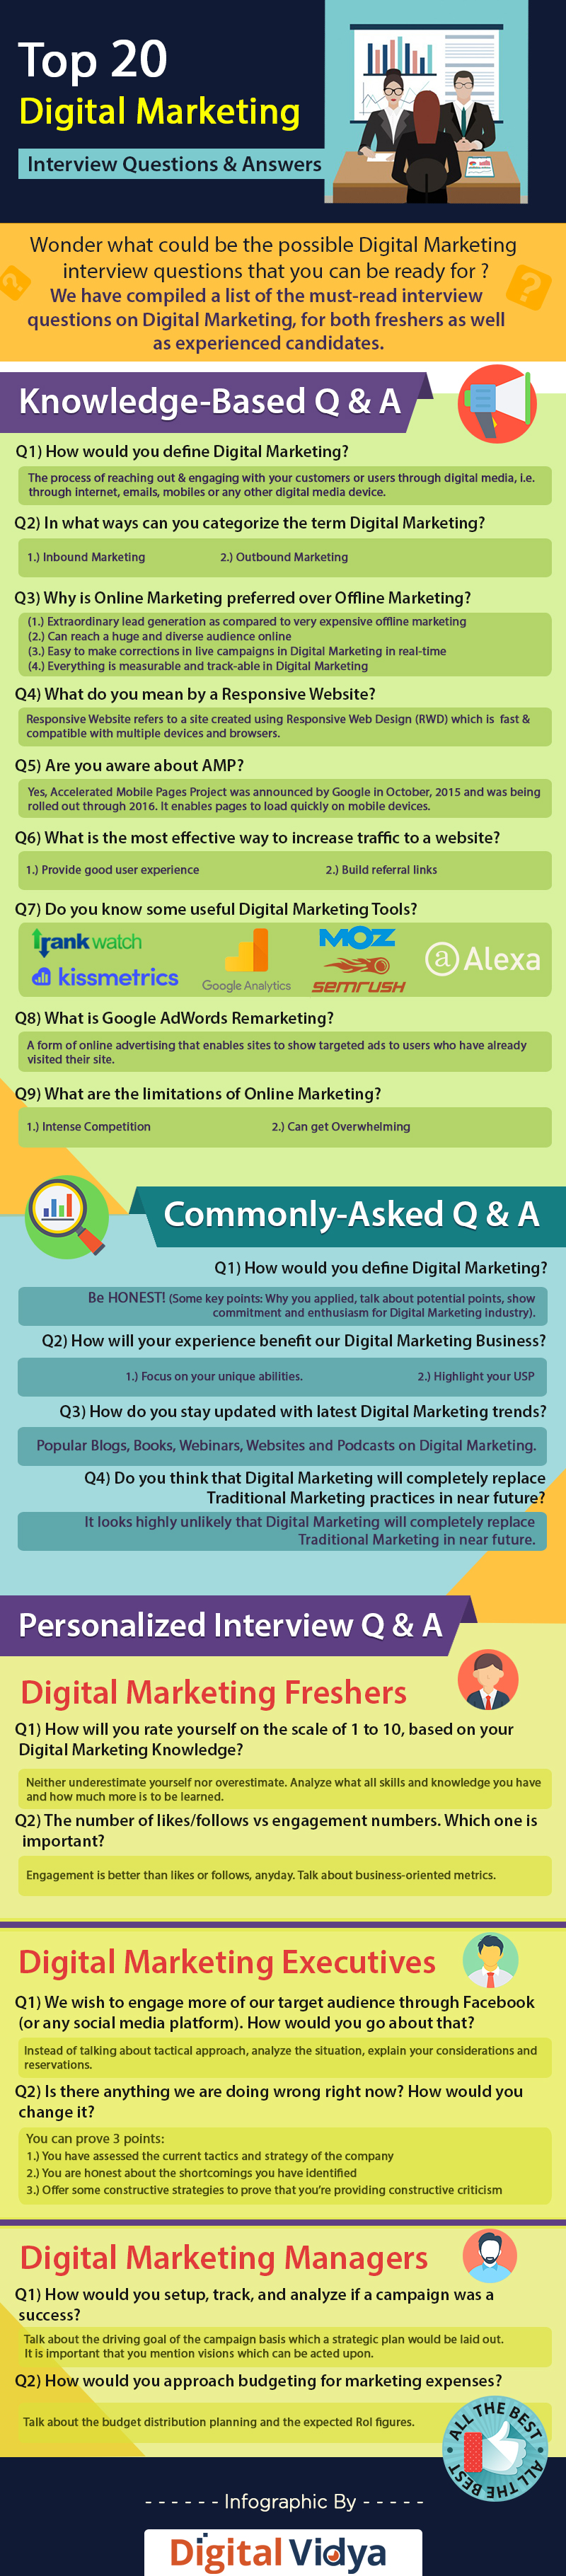 Top 20 Digital Marketing Interview Questions and Answers Guide